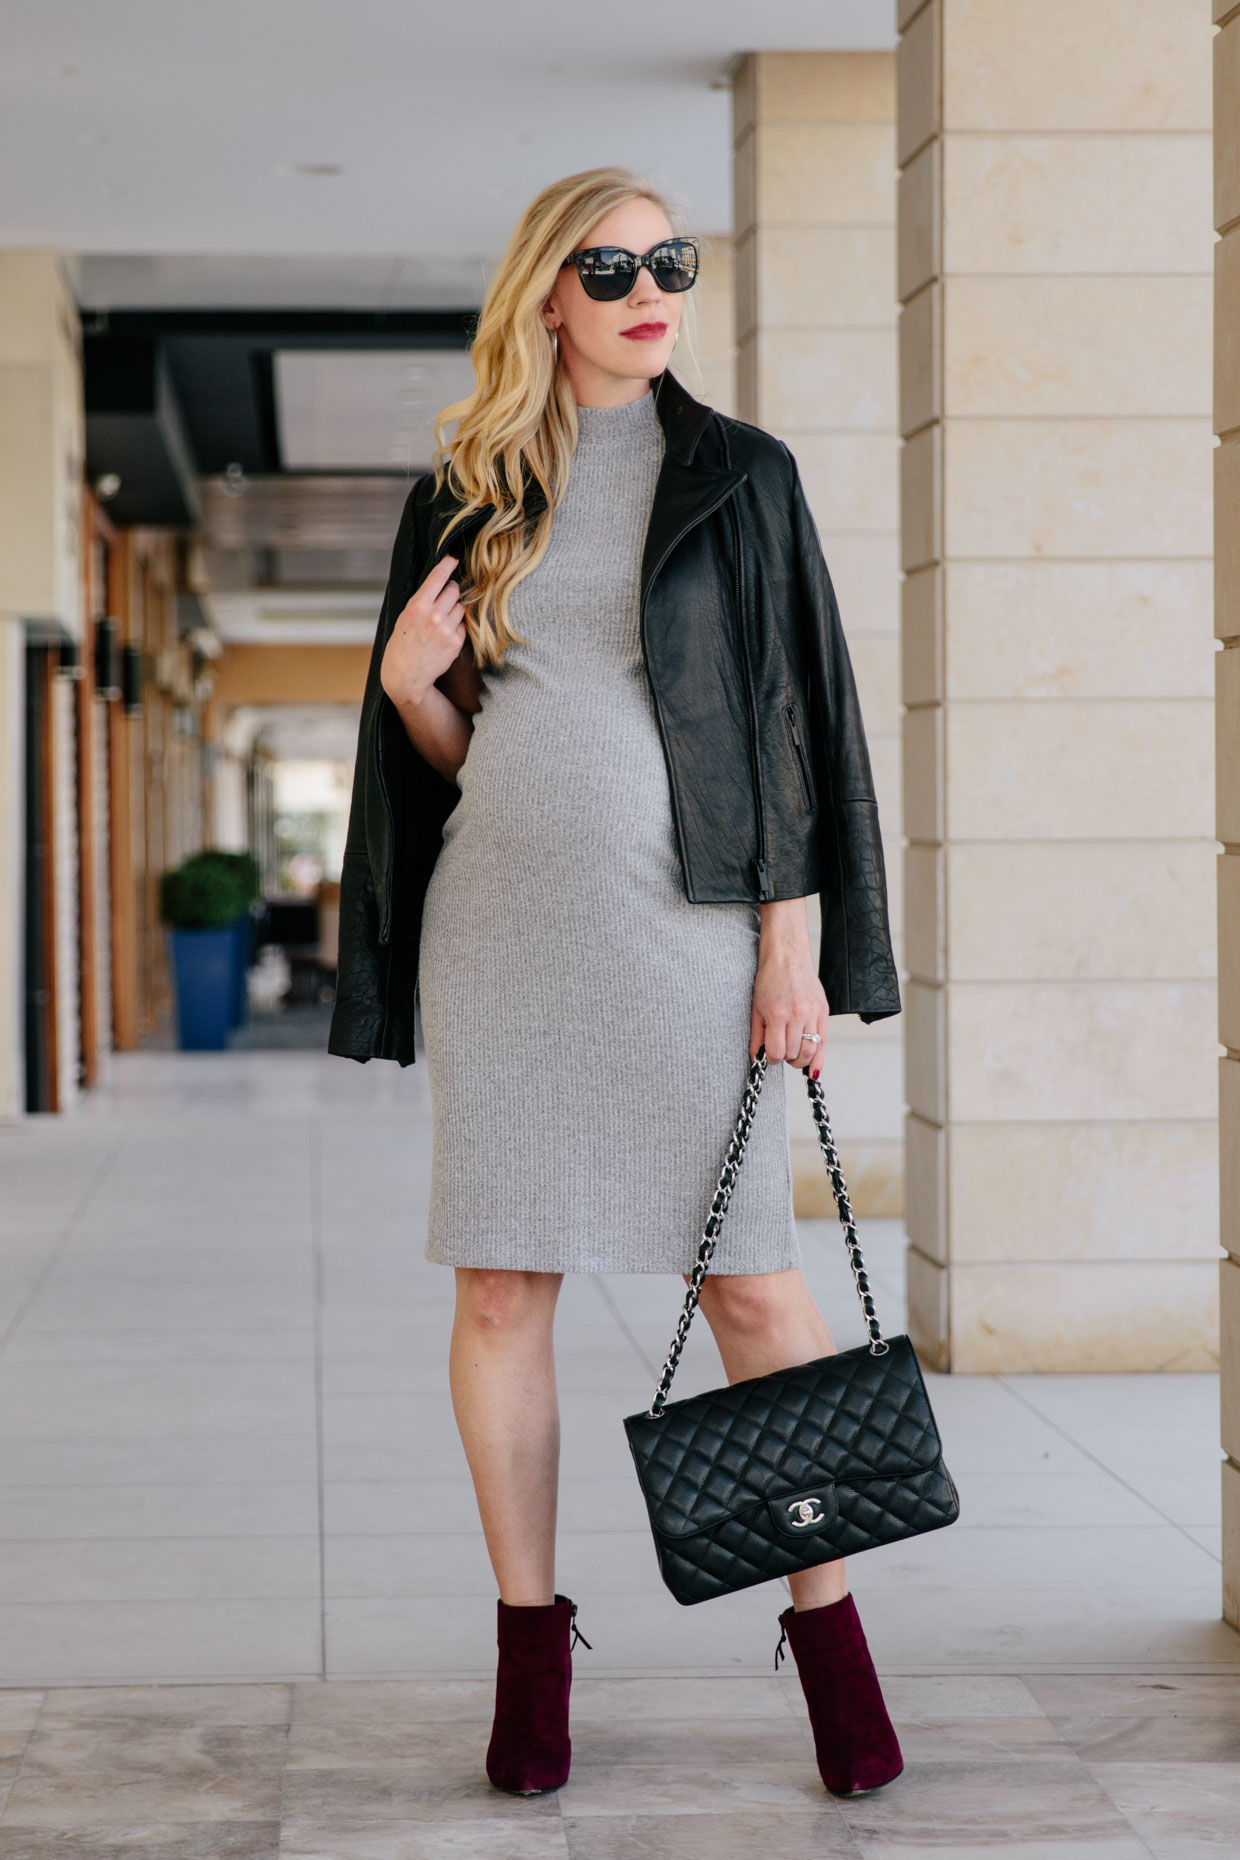 Fall Edgy Maternity Outfit, Upbeat Soles